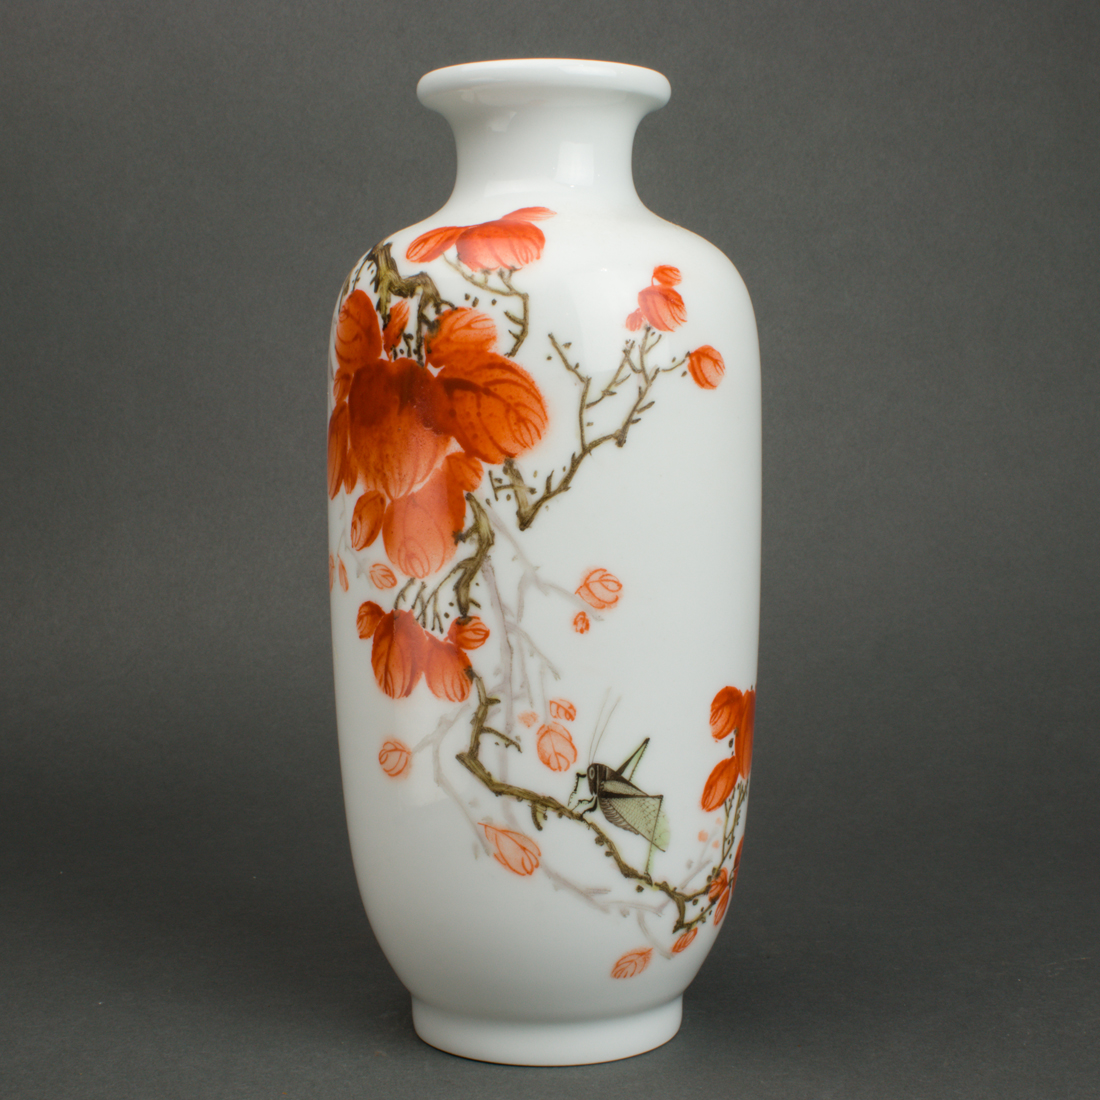 CHINESE IRON-RED DECORATED VASE